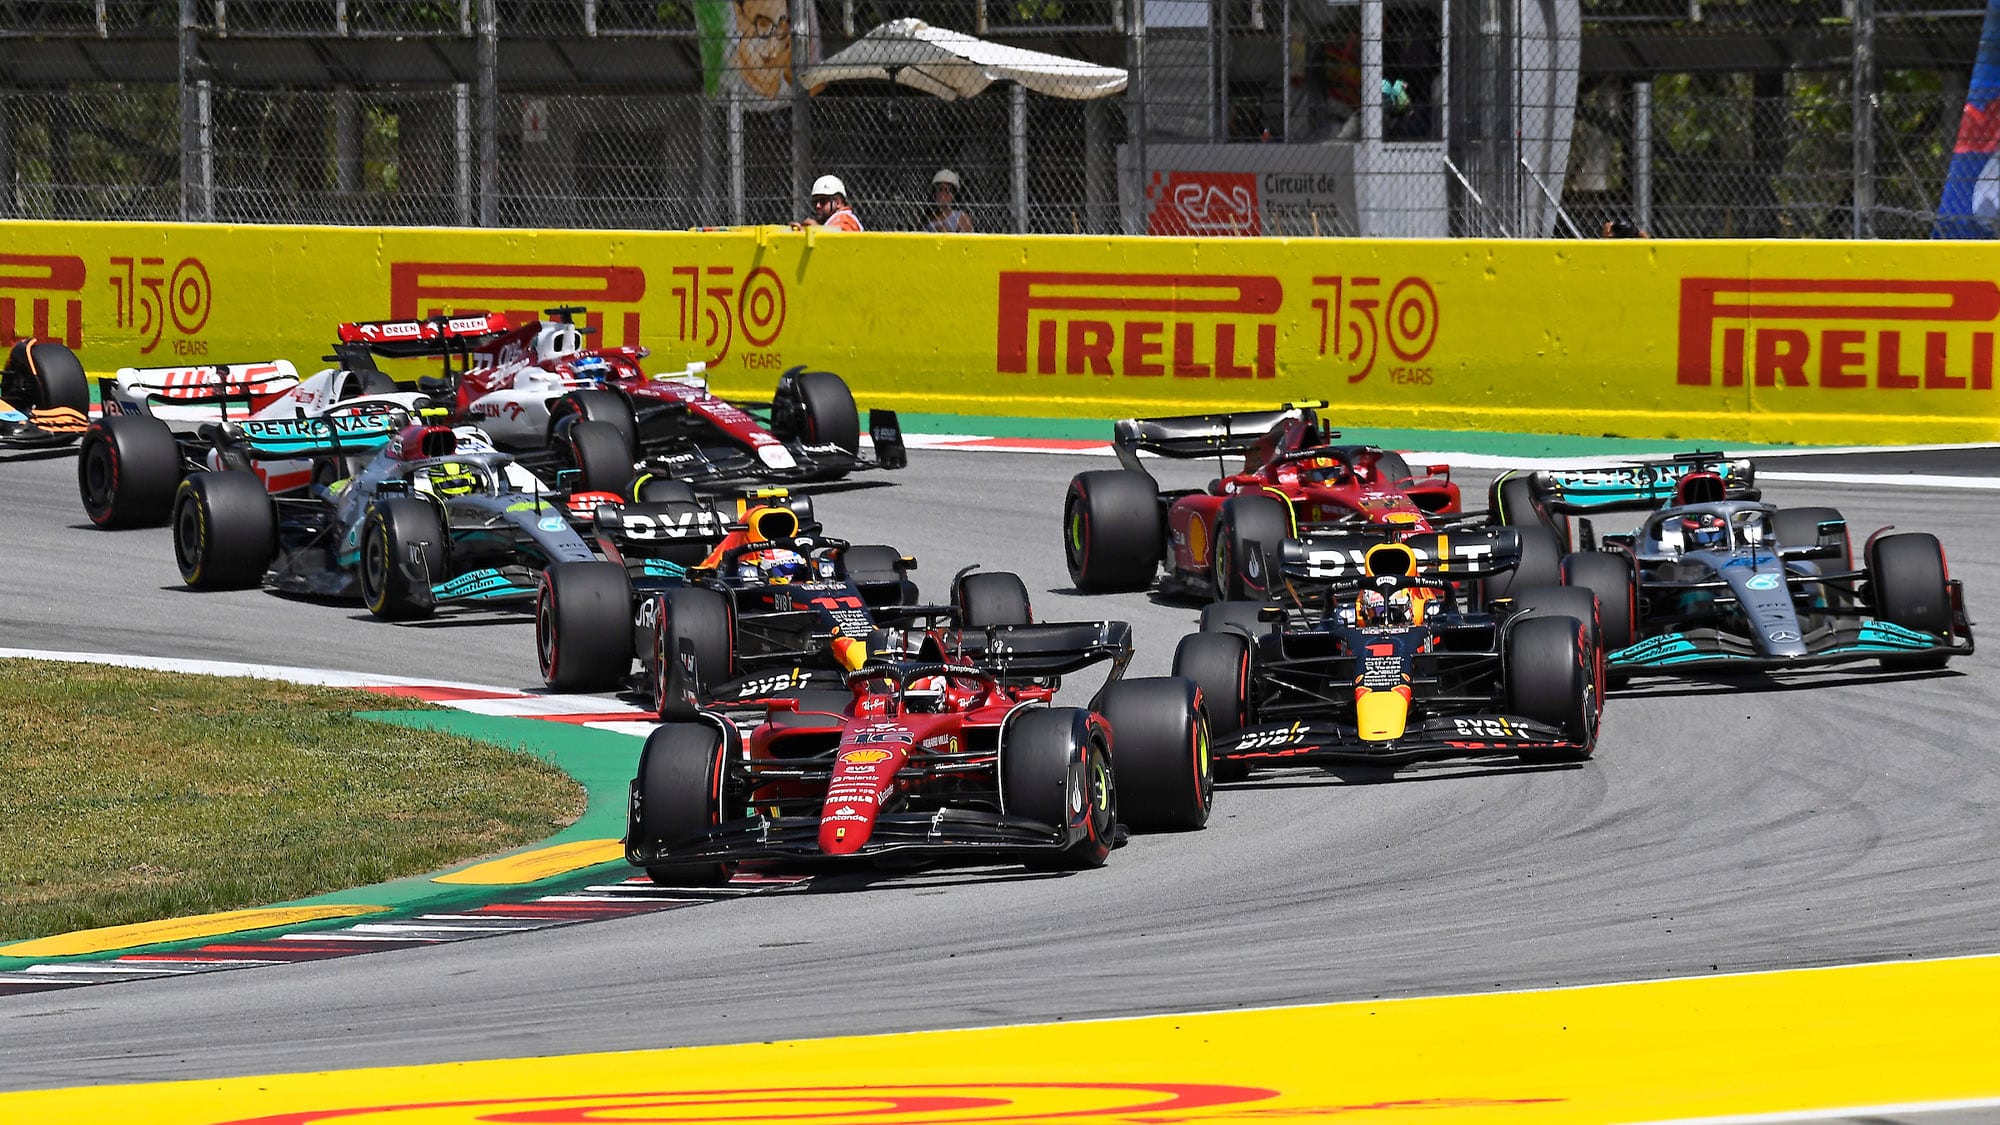 How to watch 2023 Spanish Grand Prix F1 live stream, TV schedule and start time